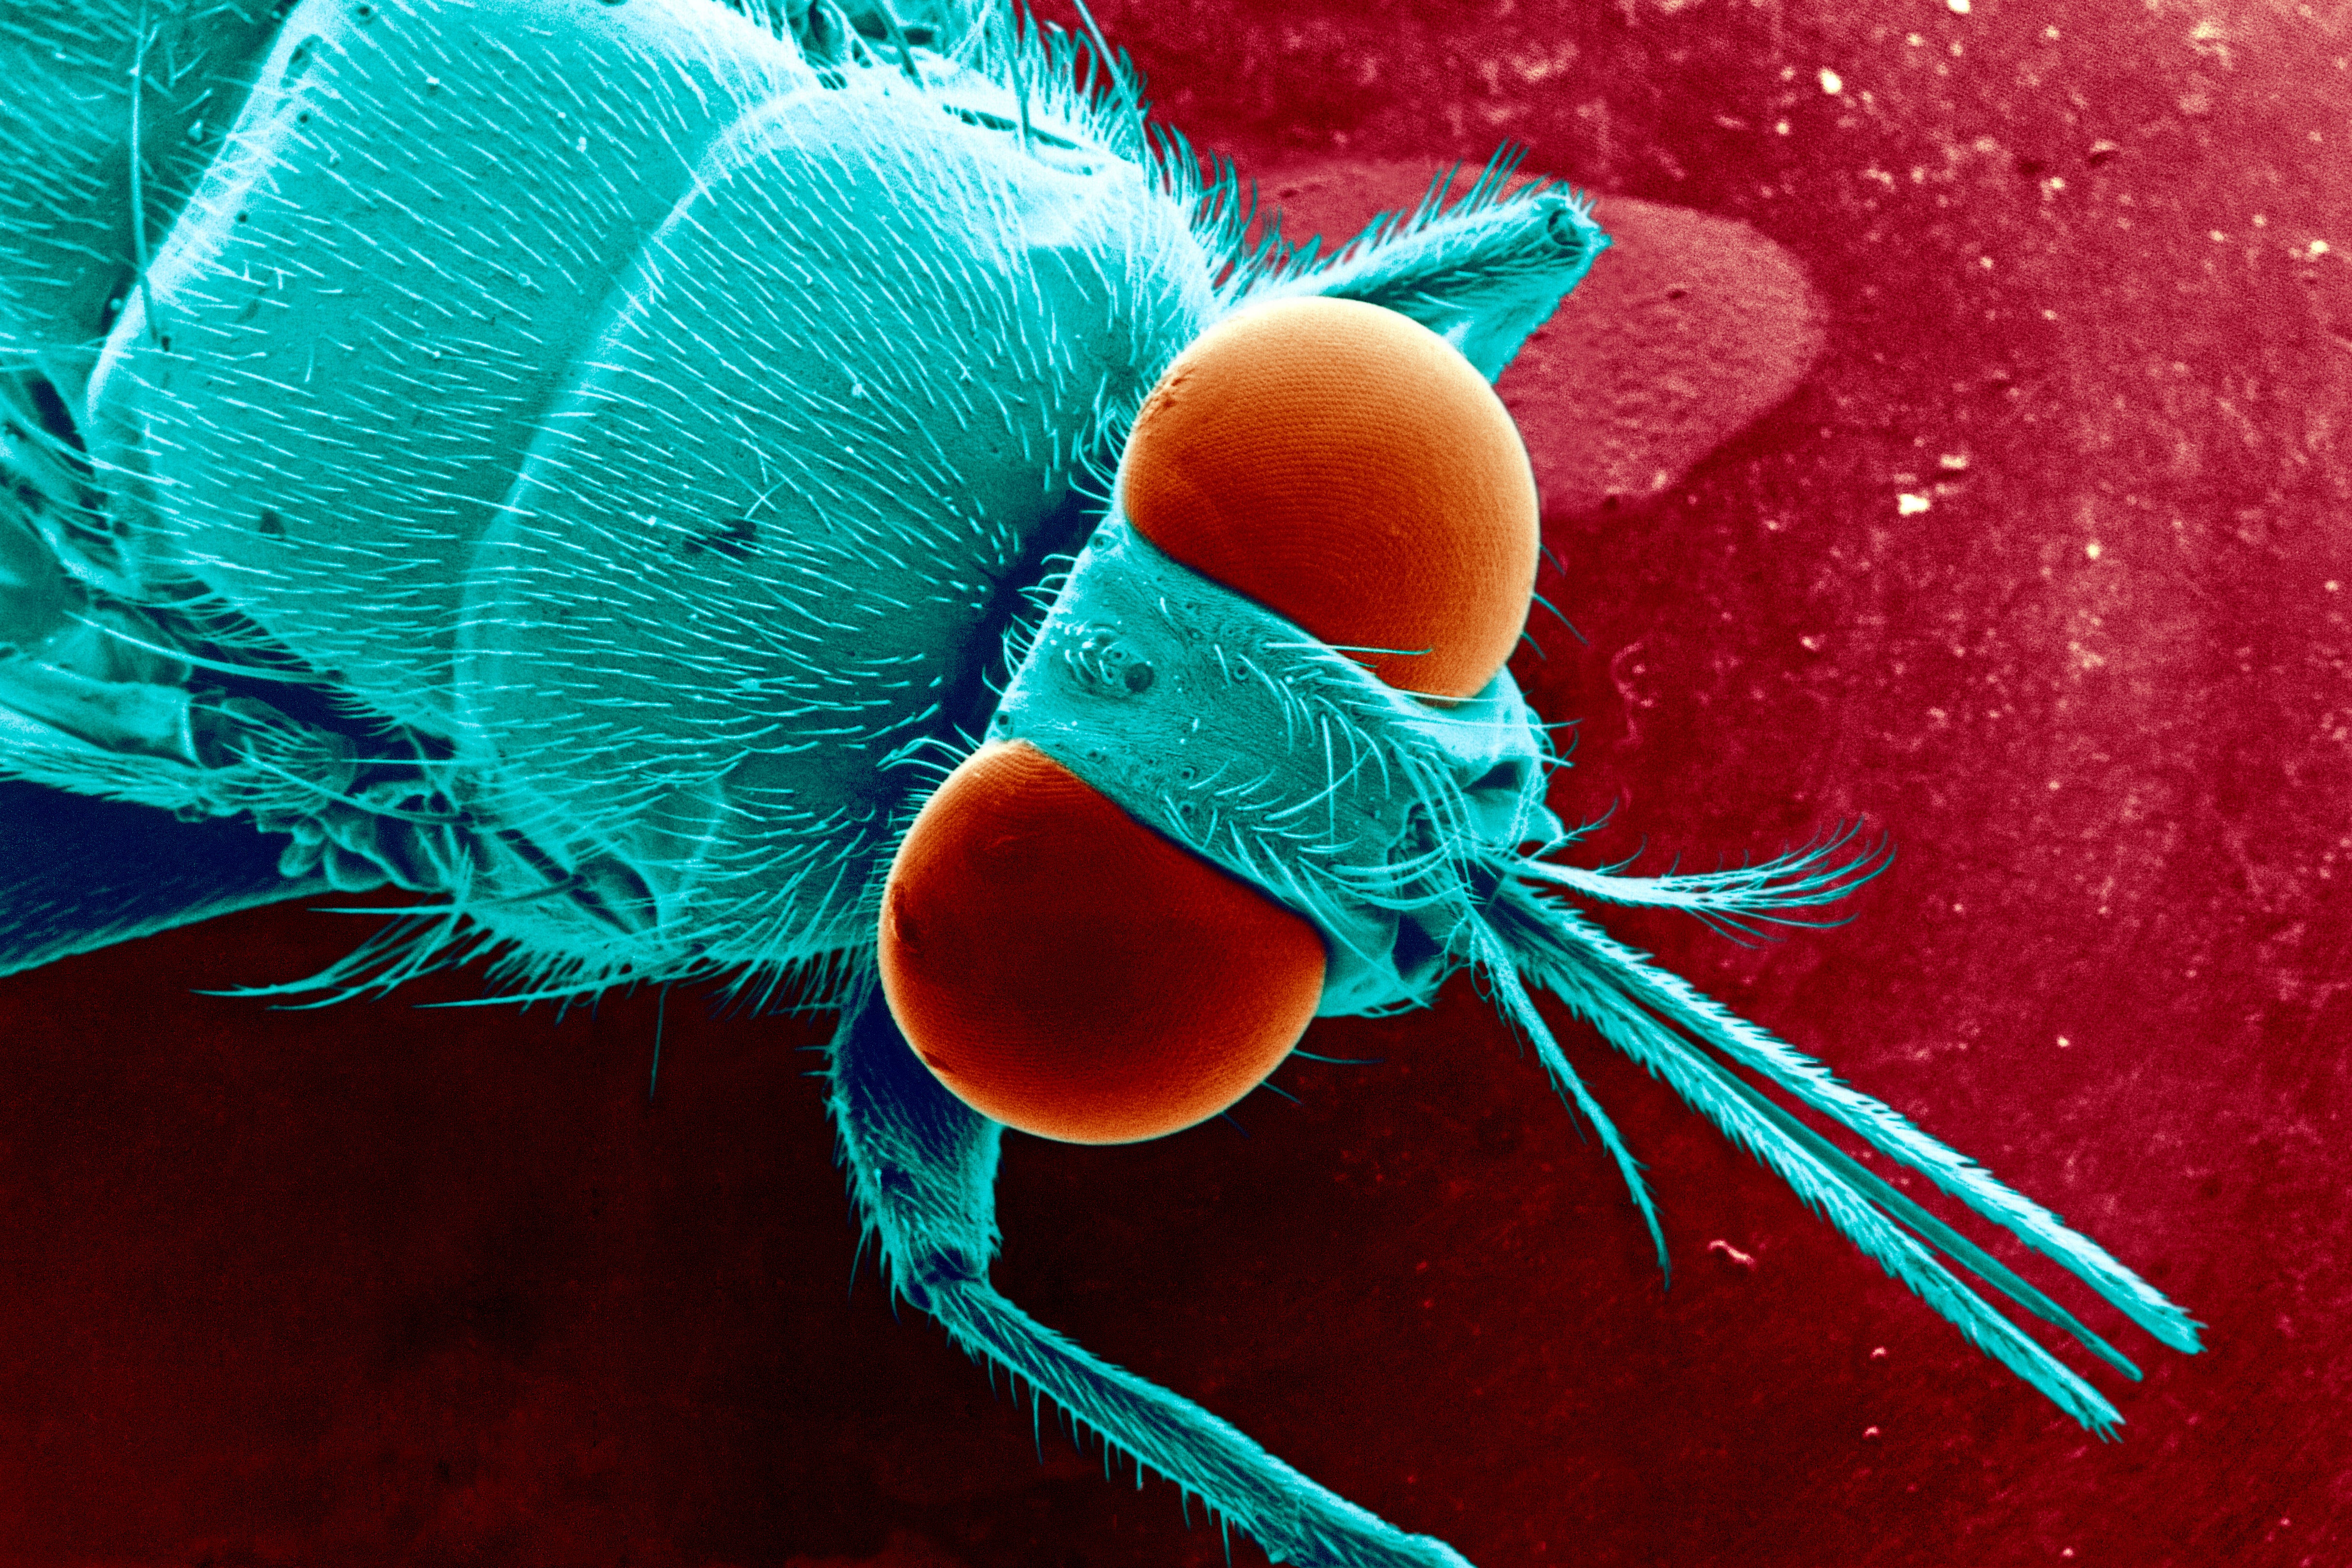 Should We Kill Off Disease-Causing Pests? Not So Fast - Scientific American